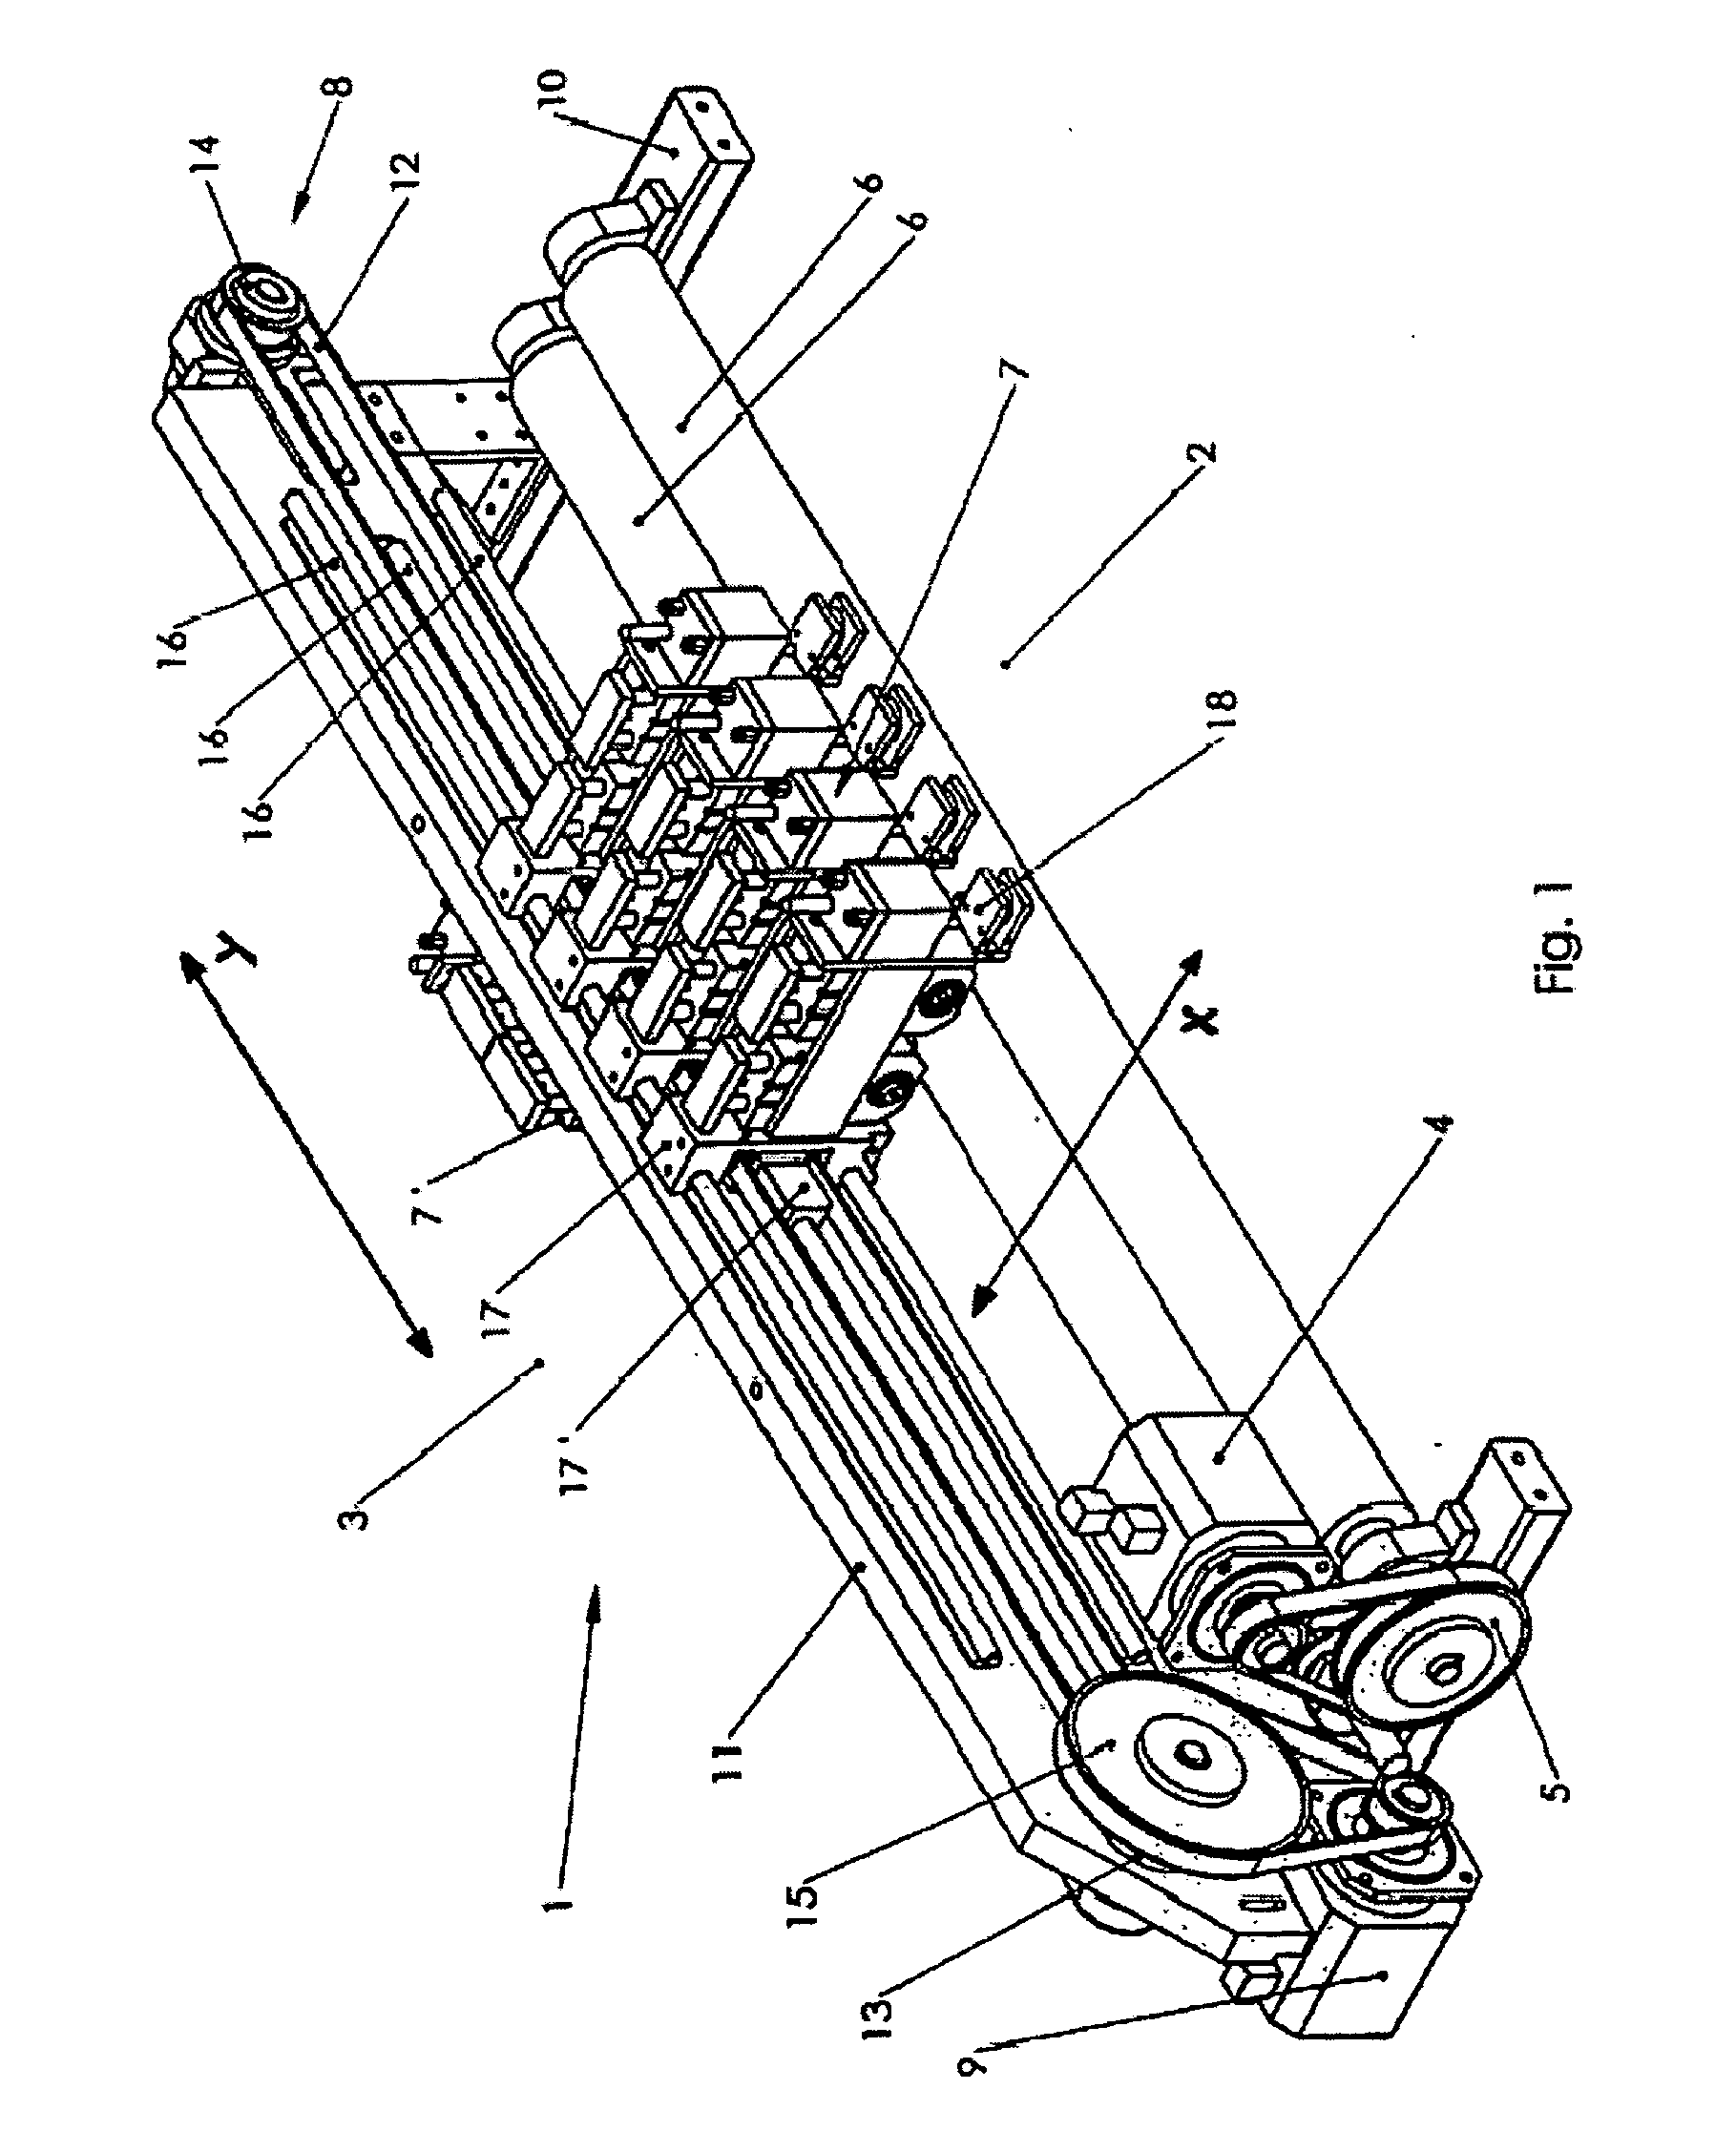 Apparatus for the positioning of a tool or a tool holder in a machine designed for processing a sheet material